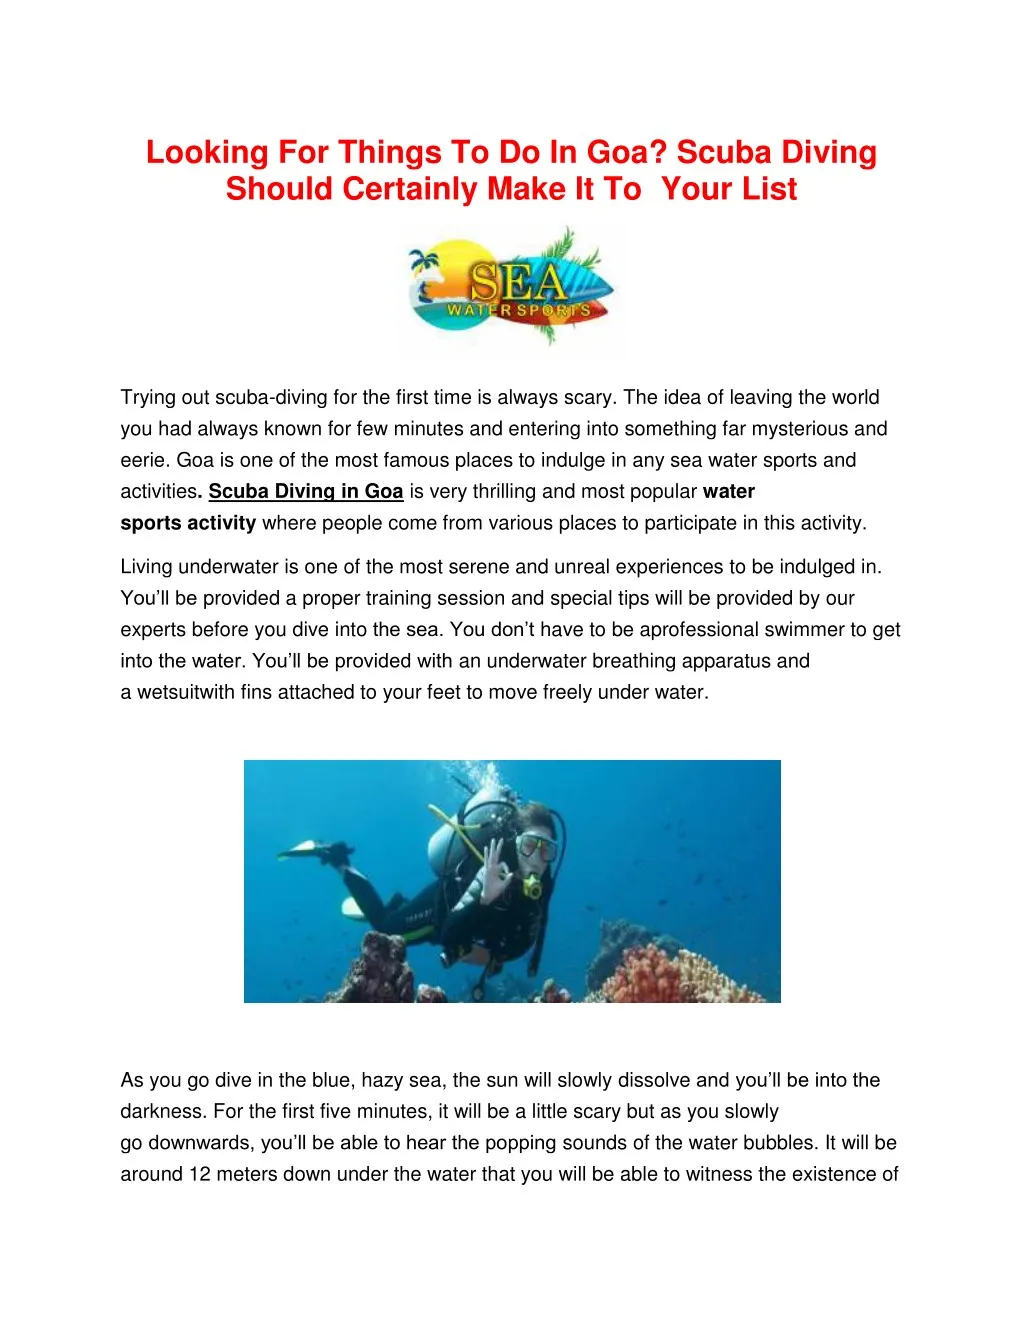 looking for things to do in goa scuba diving